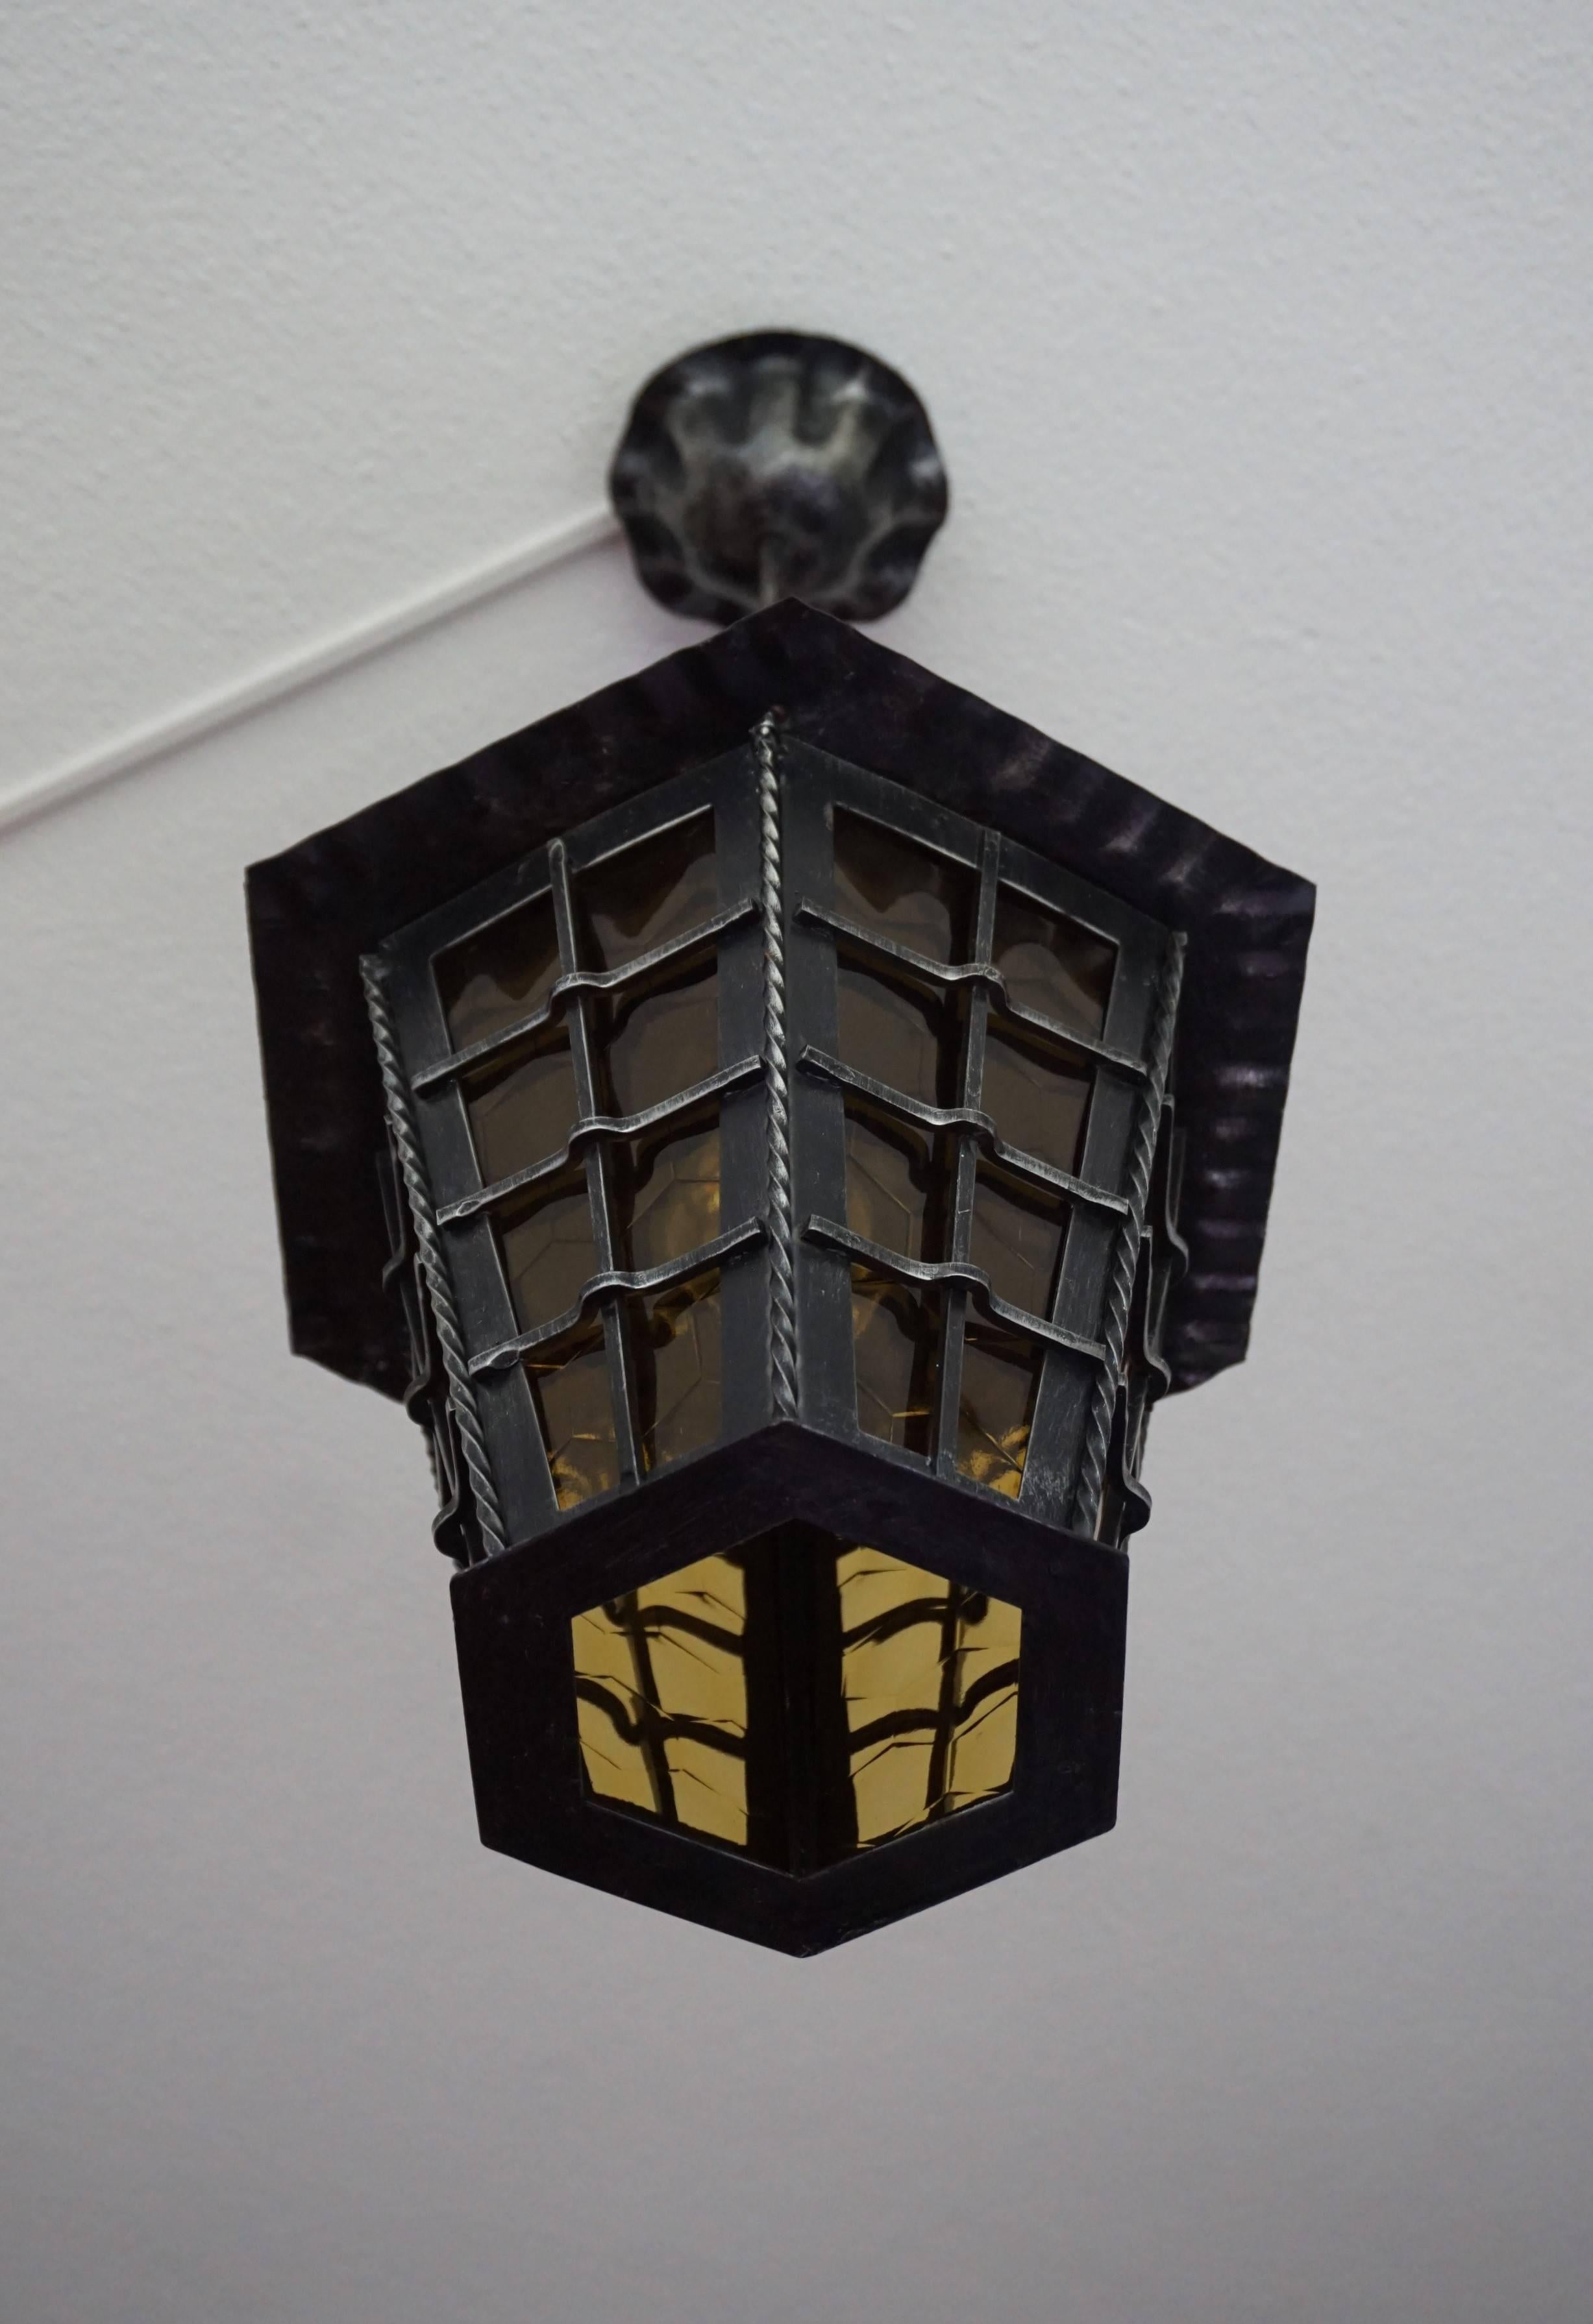 Handcrafted and great atmosphere creating lantern/pendant.

We have sold hexagonal shaped pendants before, but never one that is like a stylized beehive. The honeycomb pattern and color of the inserted glass panels combined with the hexagonal bottom